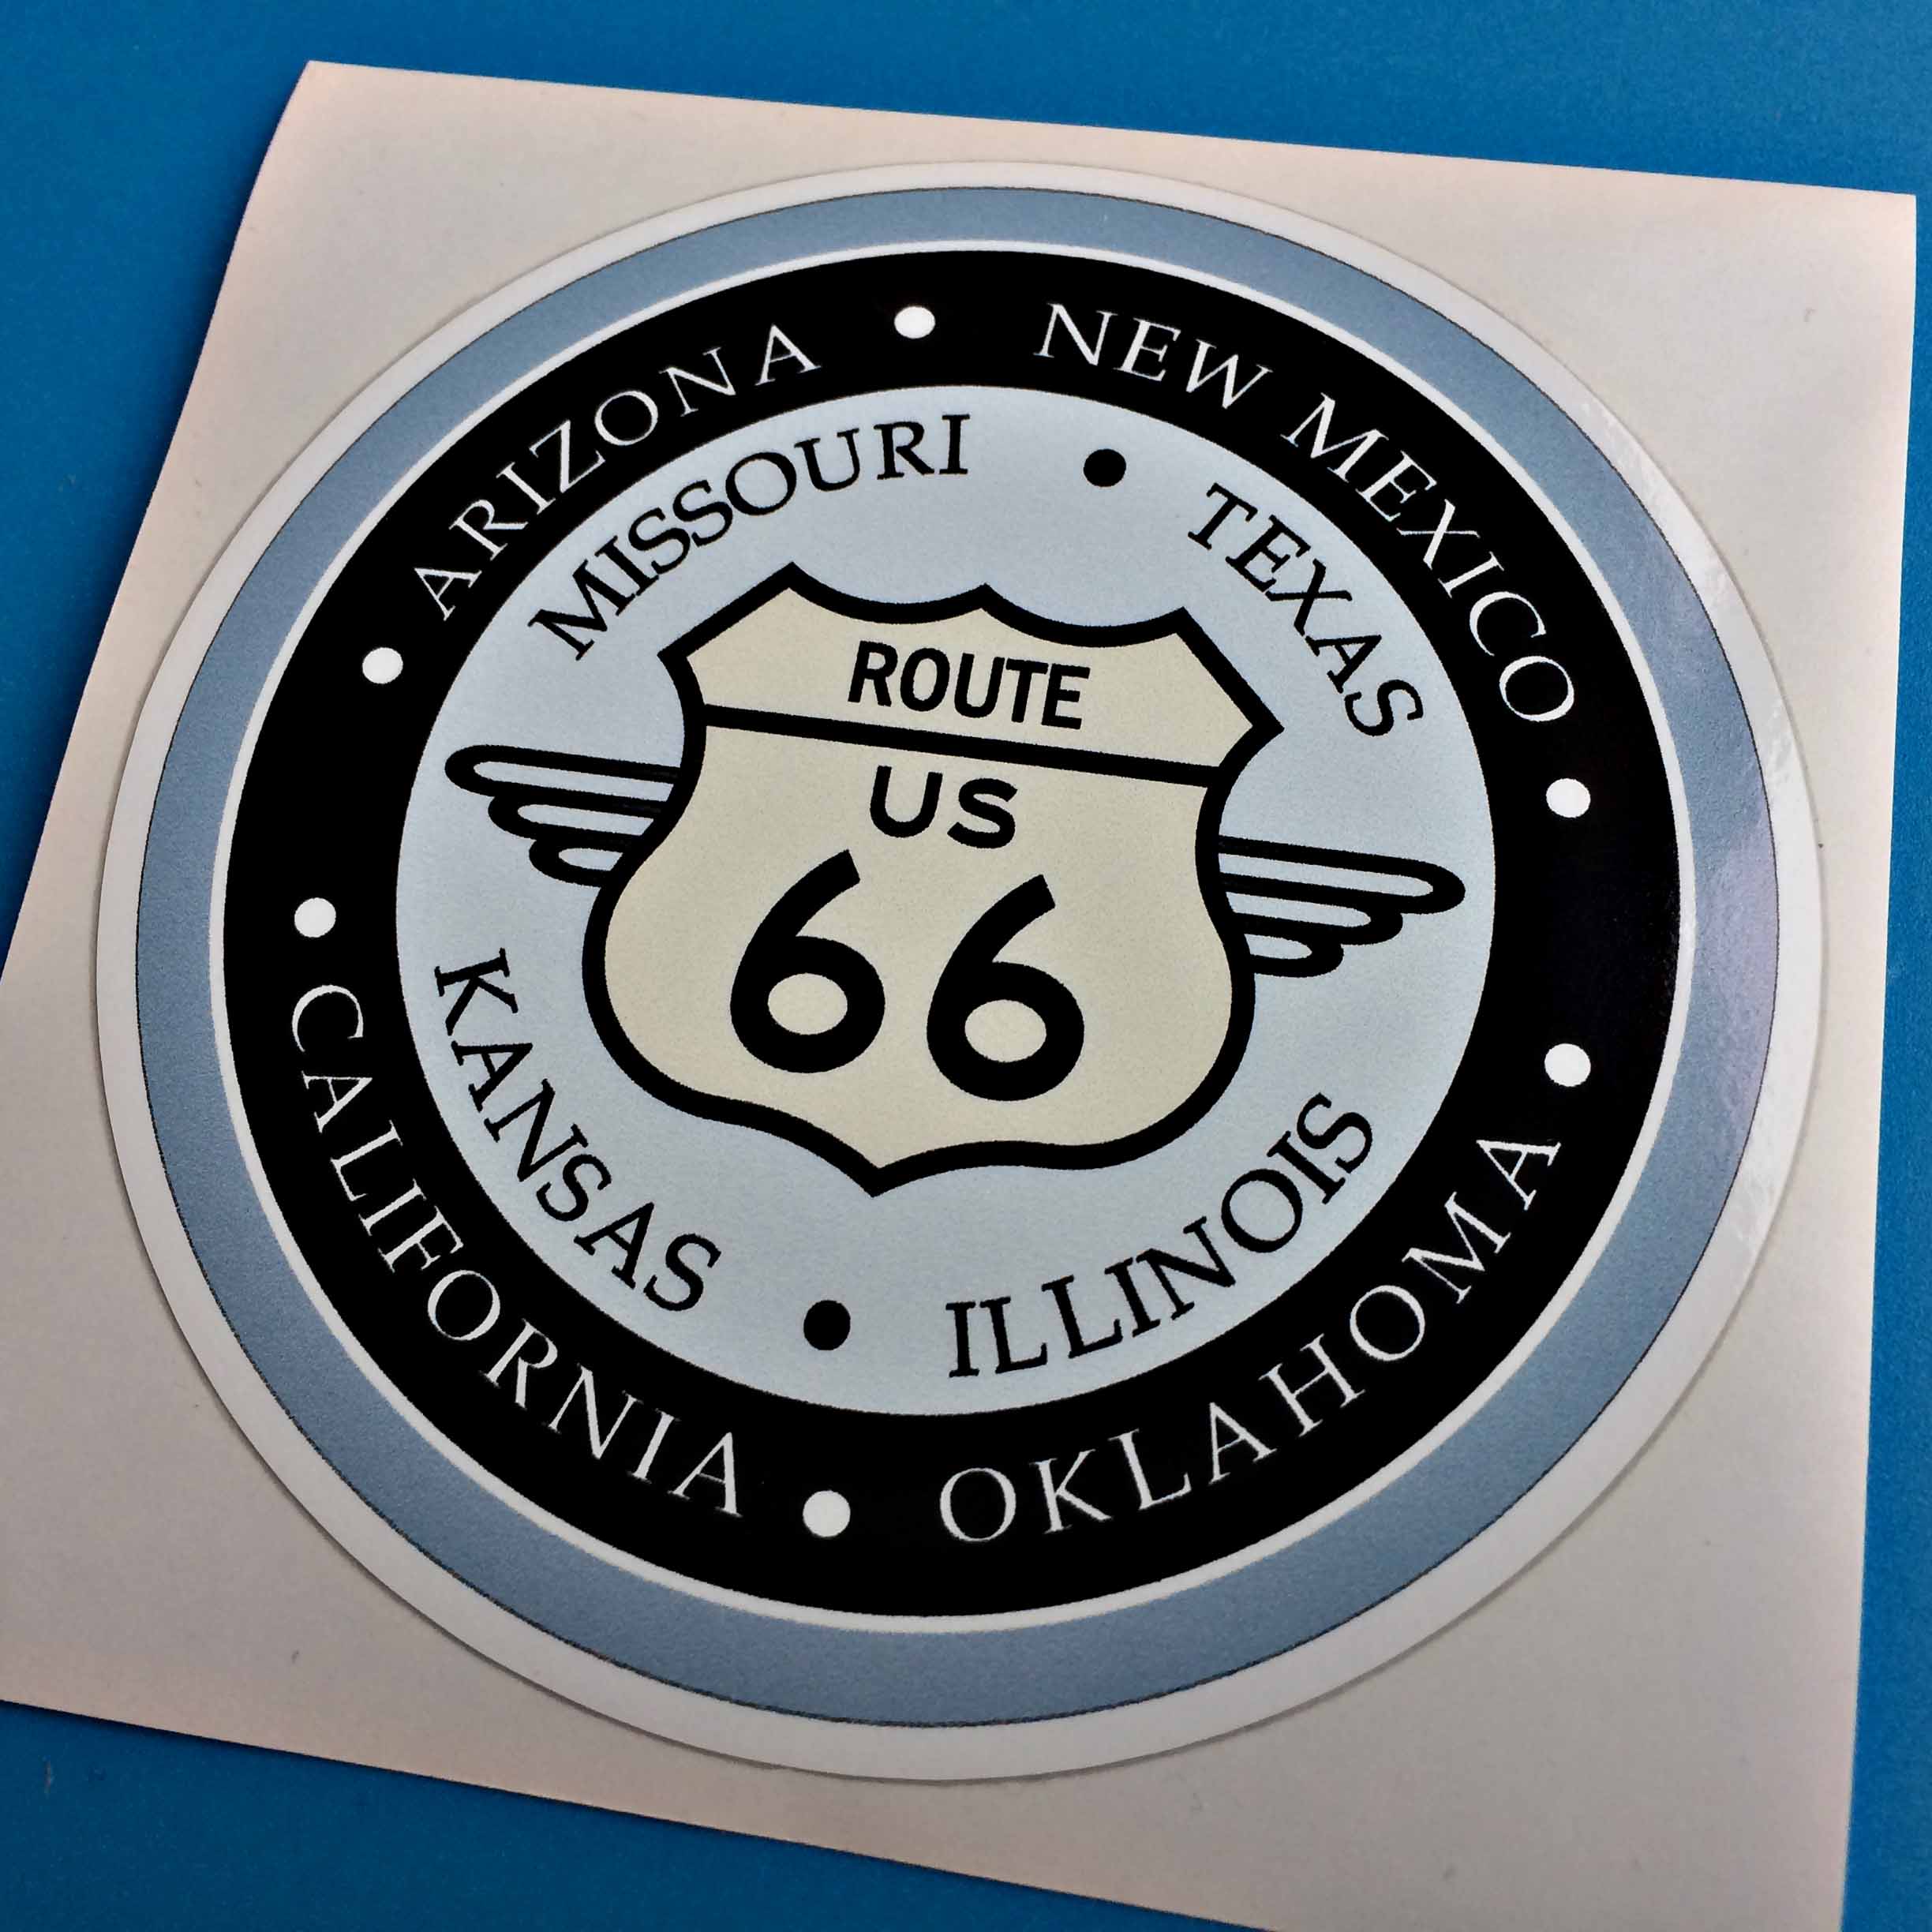 ROUTE 66 AND STATES STICKERS (BLUE RING). Route US 66 sign, Arizona, New Mexico, Missouri, Texas, Kansas, Illinois, California, Oklahoma. Black and white lettering within three concentric circles of black and blue.